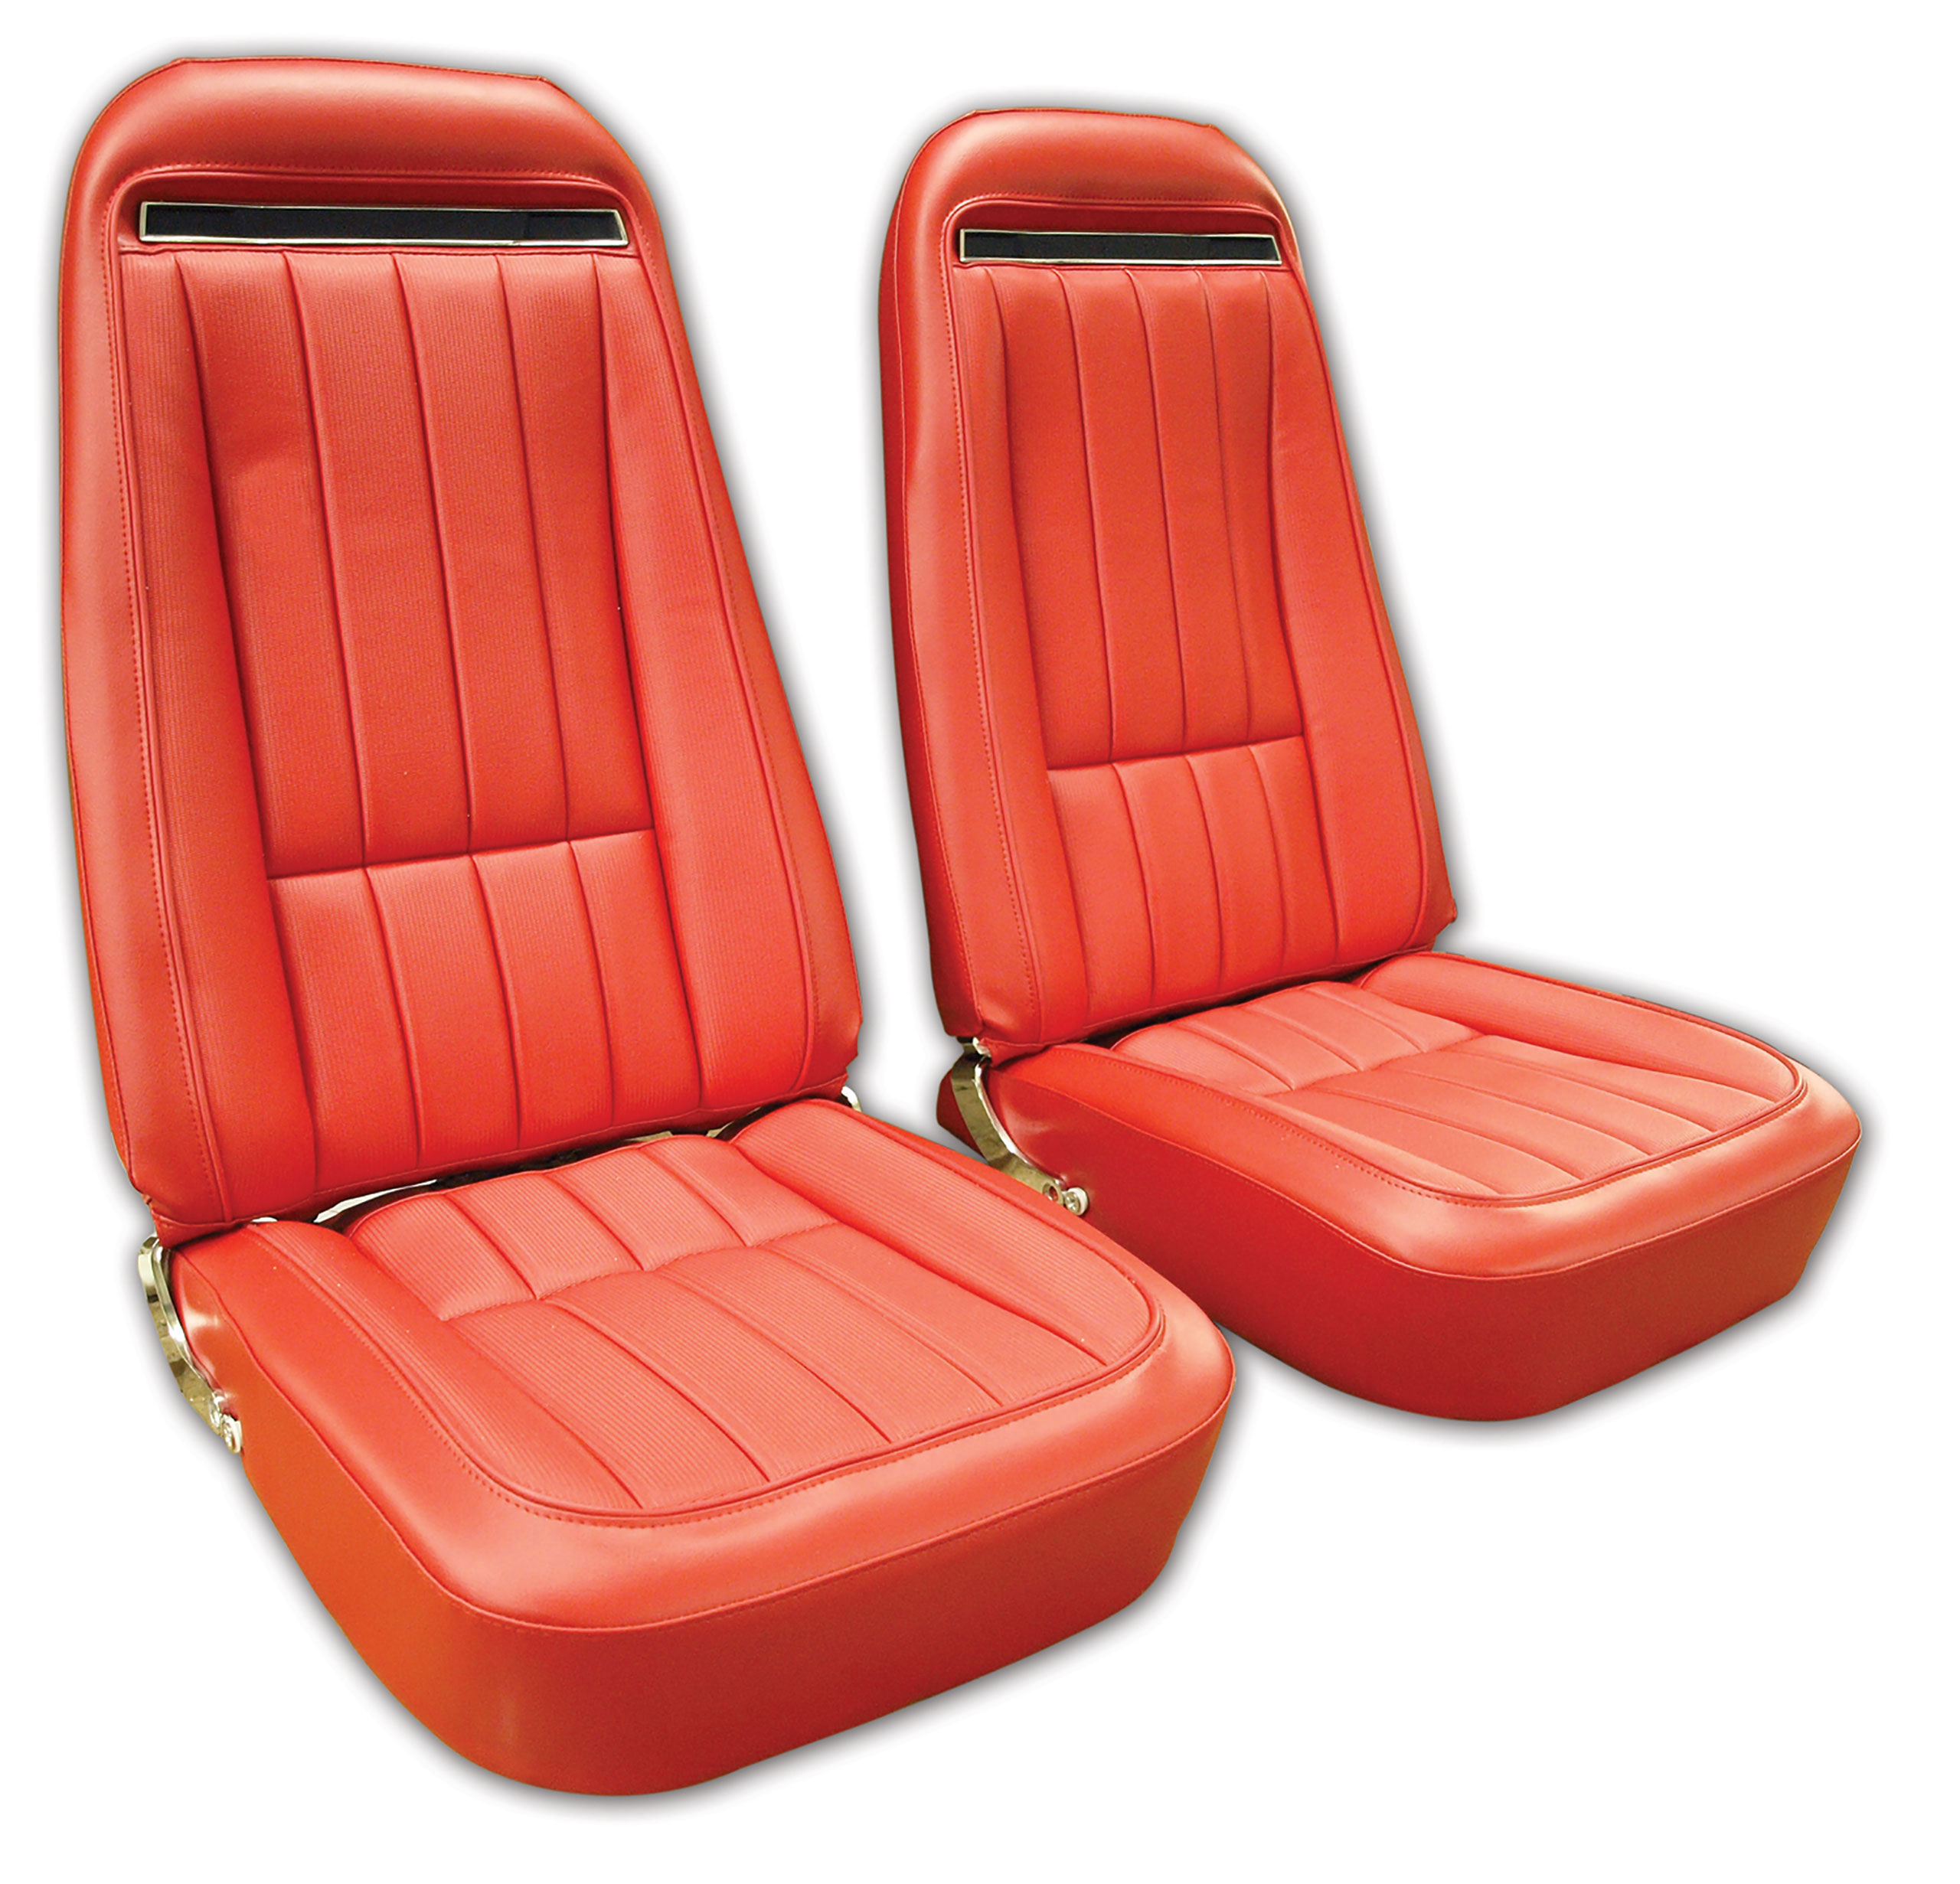 1972 C3 Corvette Mounted Seats Red "Leather-Like" Vinyl With Shoulder Harness